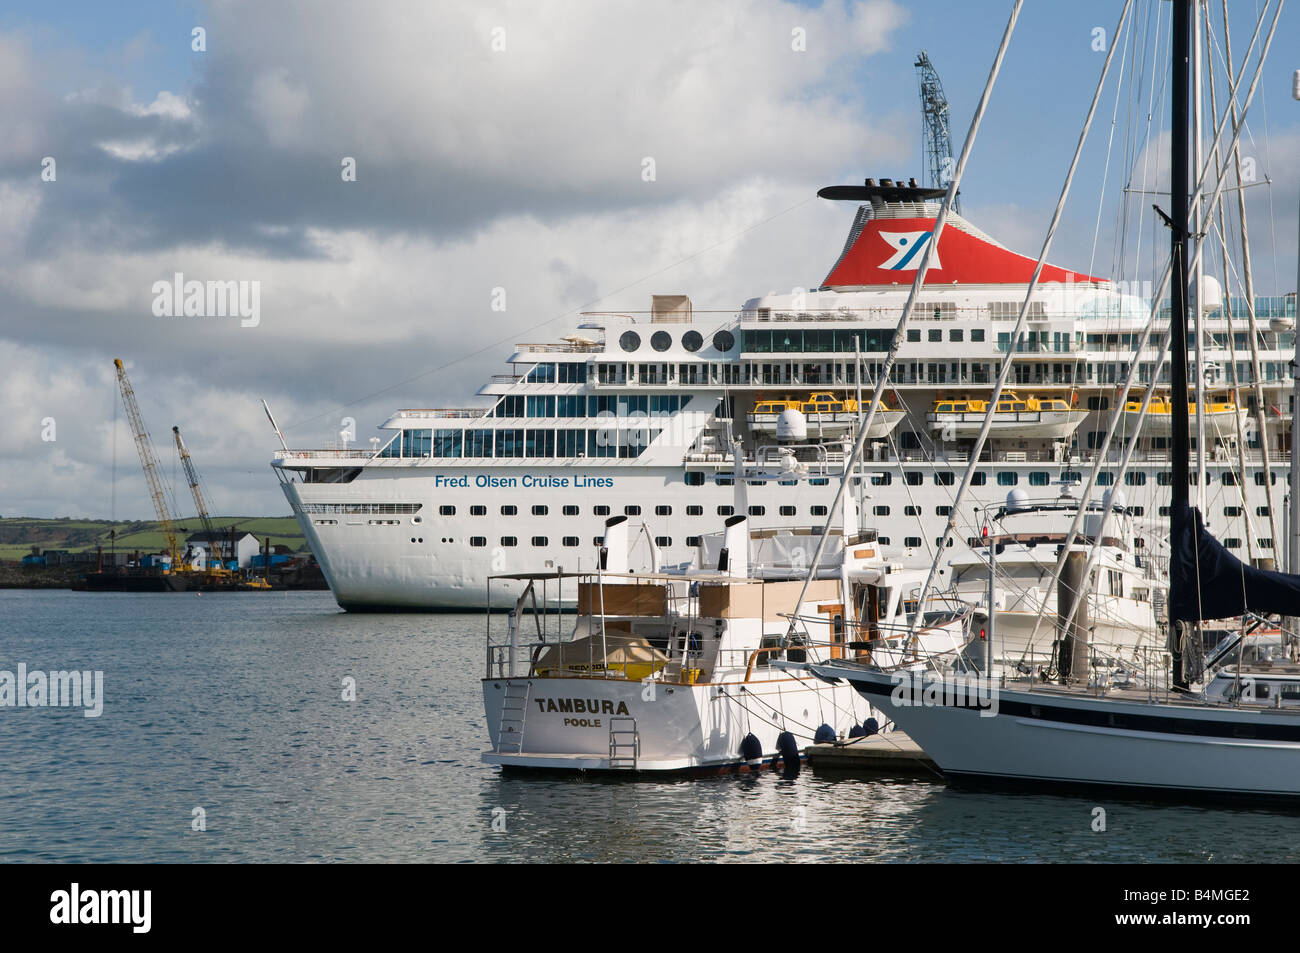 Falmouth, Cornwall, UK. Fred Olsen Cruise Liner moored in the River Fal Stock Photo